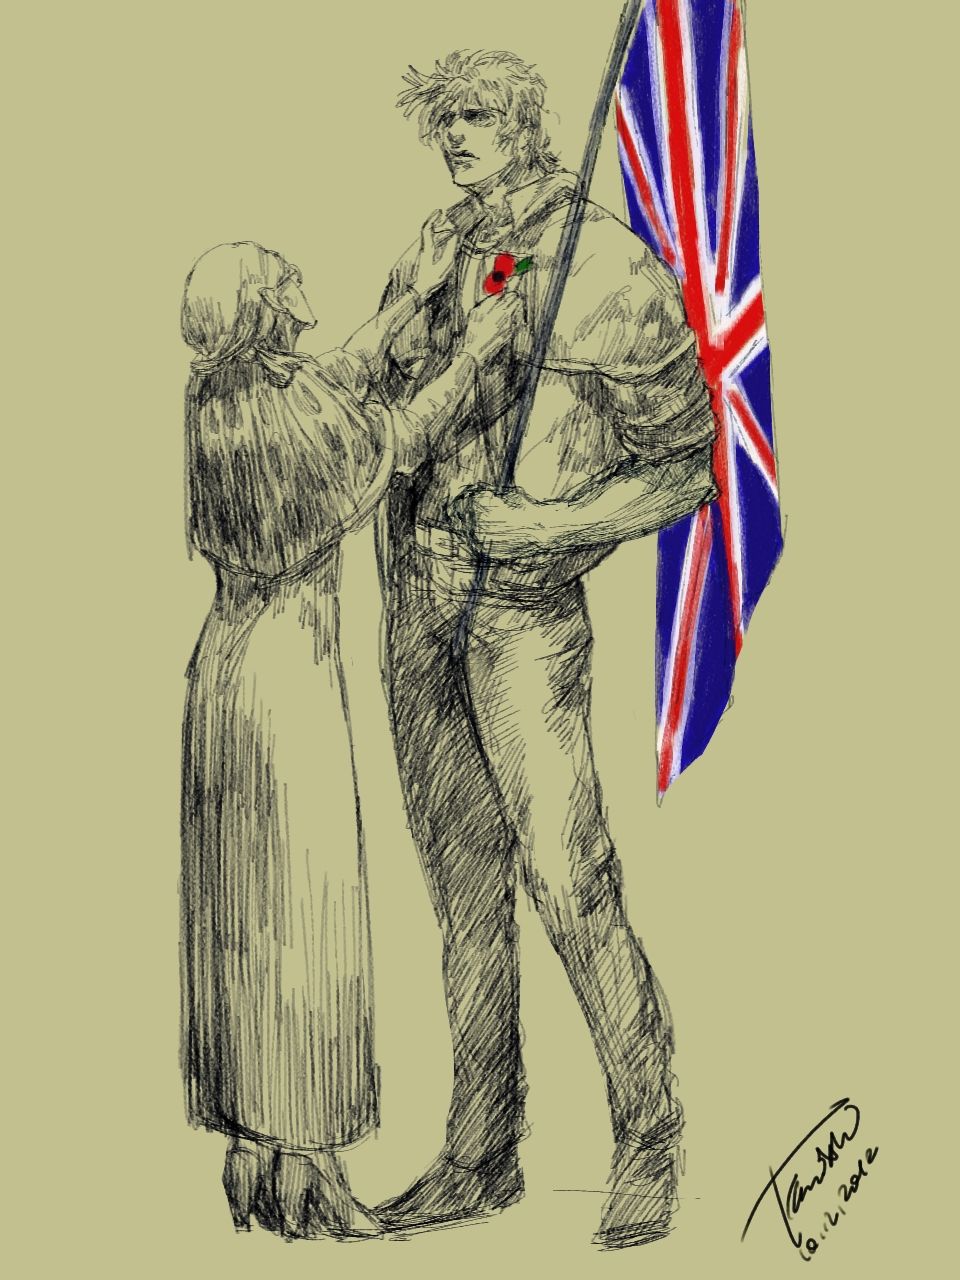 1boy 1girl aldurvankar england erina_pendleton flag grandmother_and_grandson height_difference highres jacket jojo_no_kimyou_na_bouken joseph_joestar_(young) partially_colored poppy realistic remembrance_day size_difference union_jack